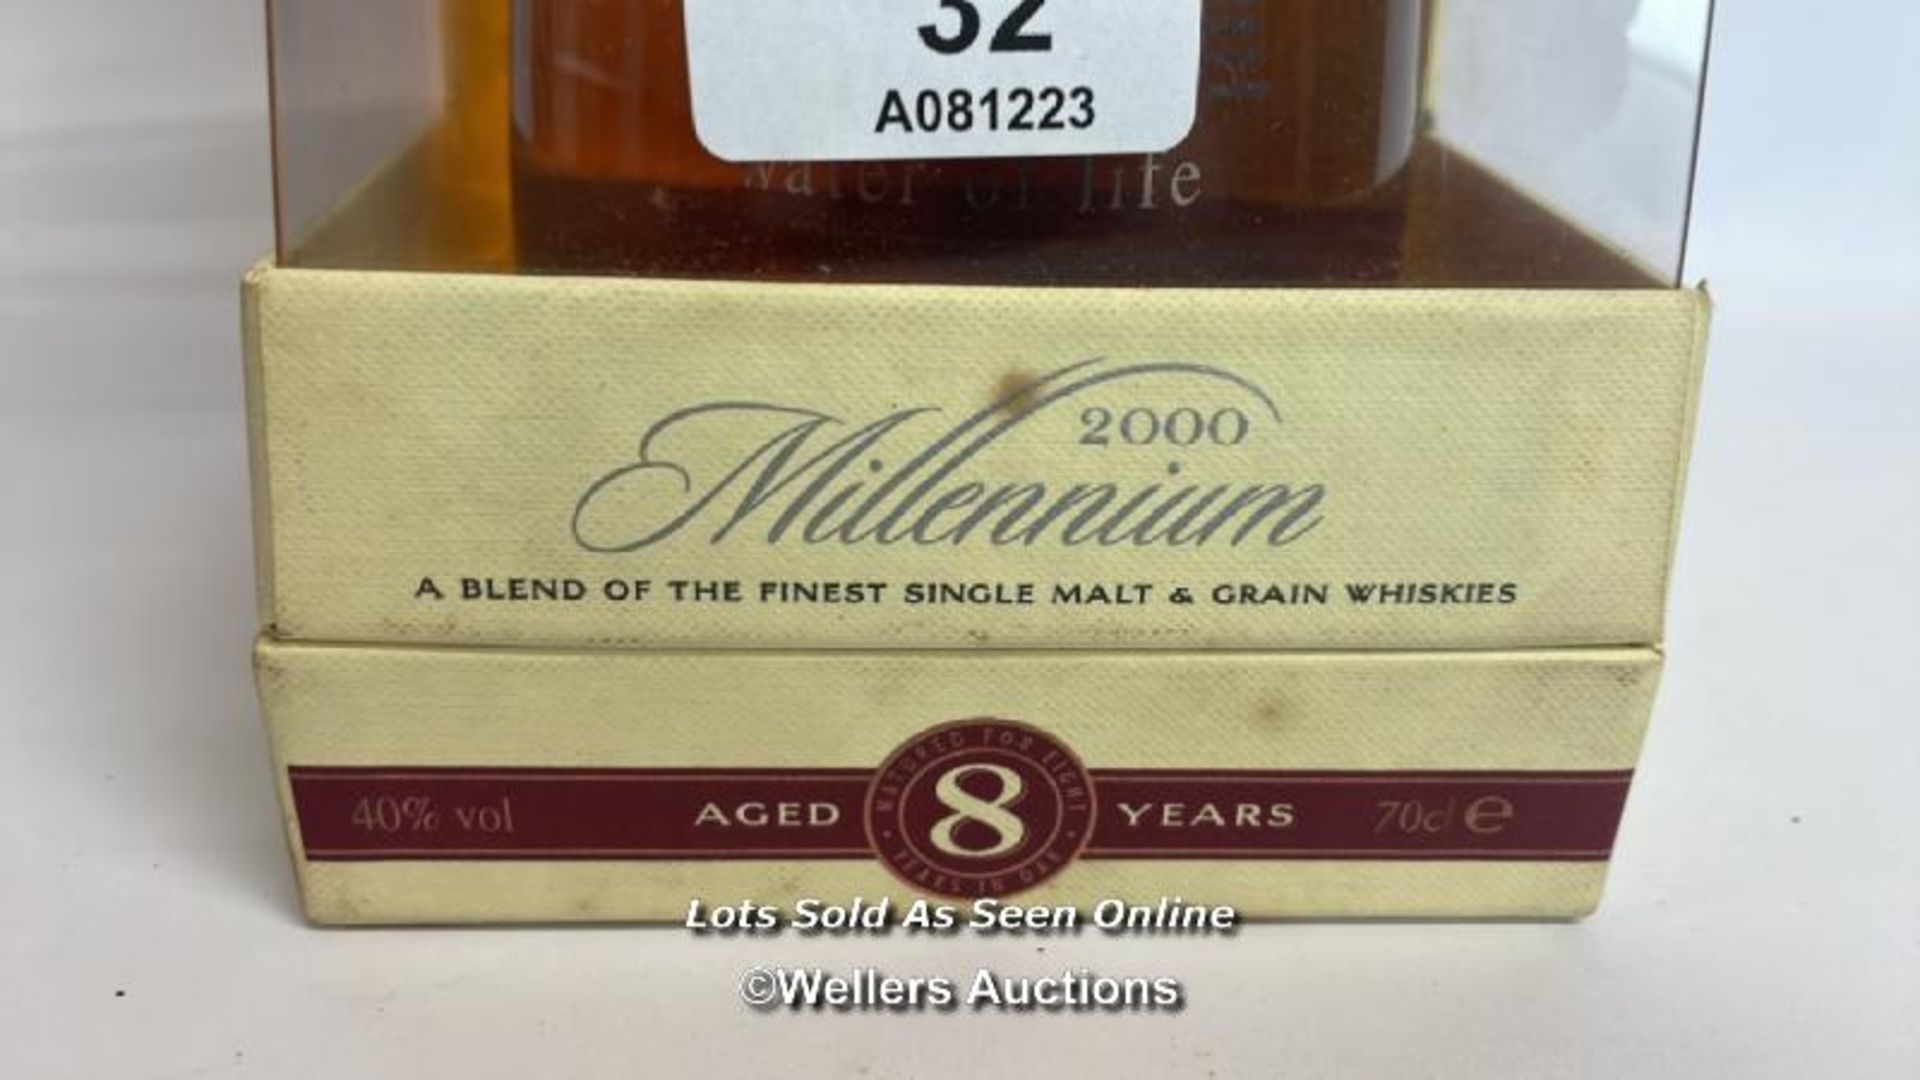 Bell's Extra Special 2000 Millenium Water of Life Whisky, Aged 8 Years, 70cl, 40% vol, In original - Image 3 of 10